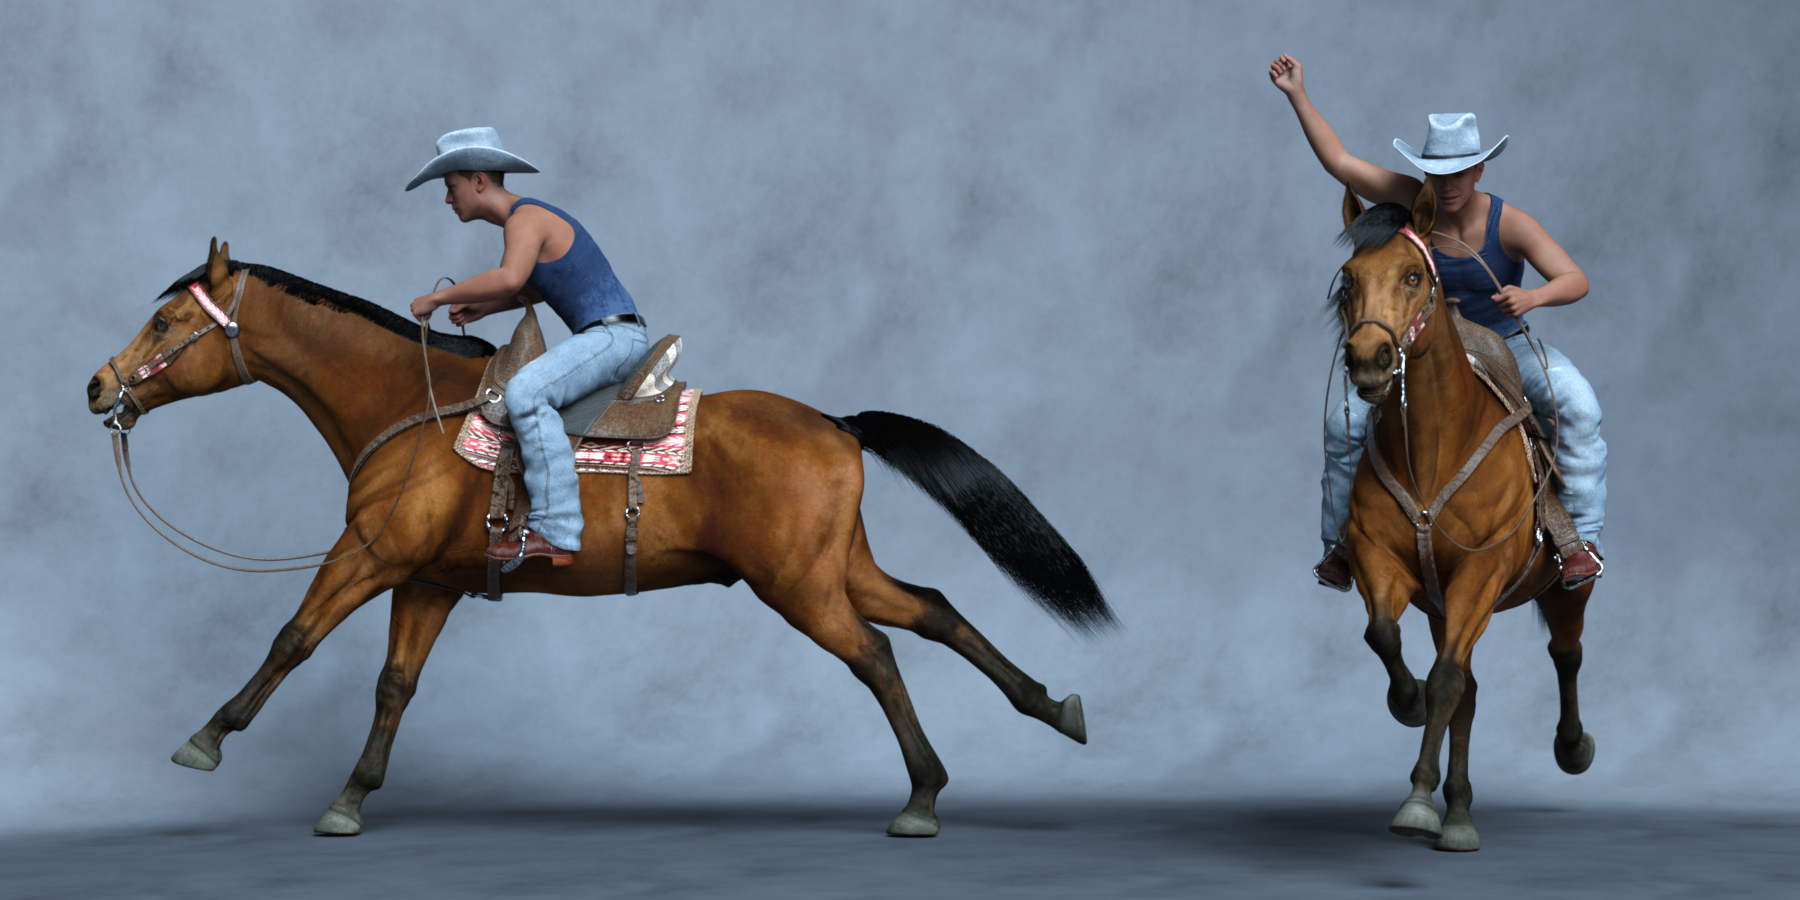 West Ride Hierarchical Poses for Genesis 9 and Daz Horse 3 by: Ensary, 3D Models by Daz 3D